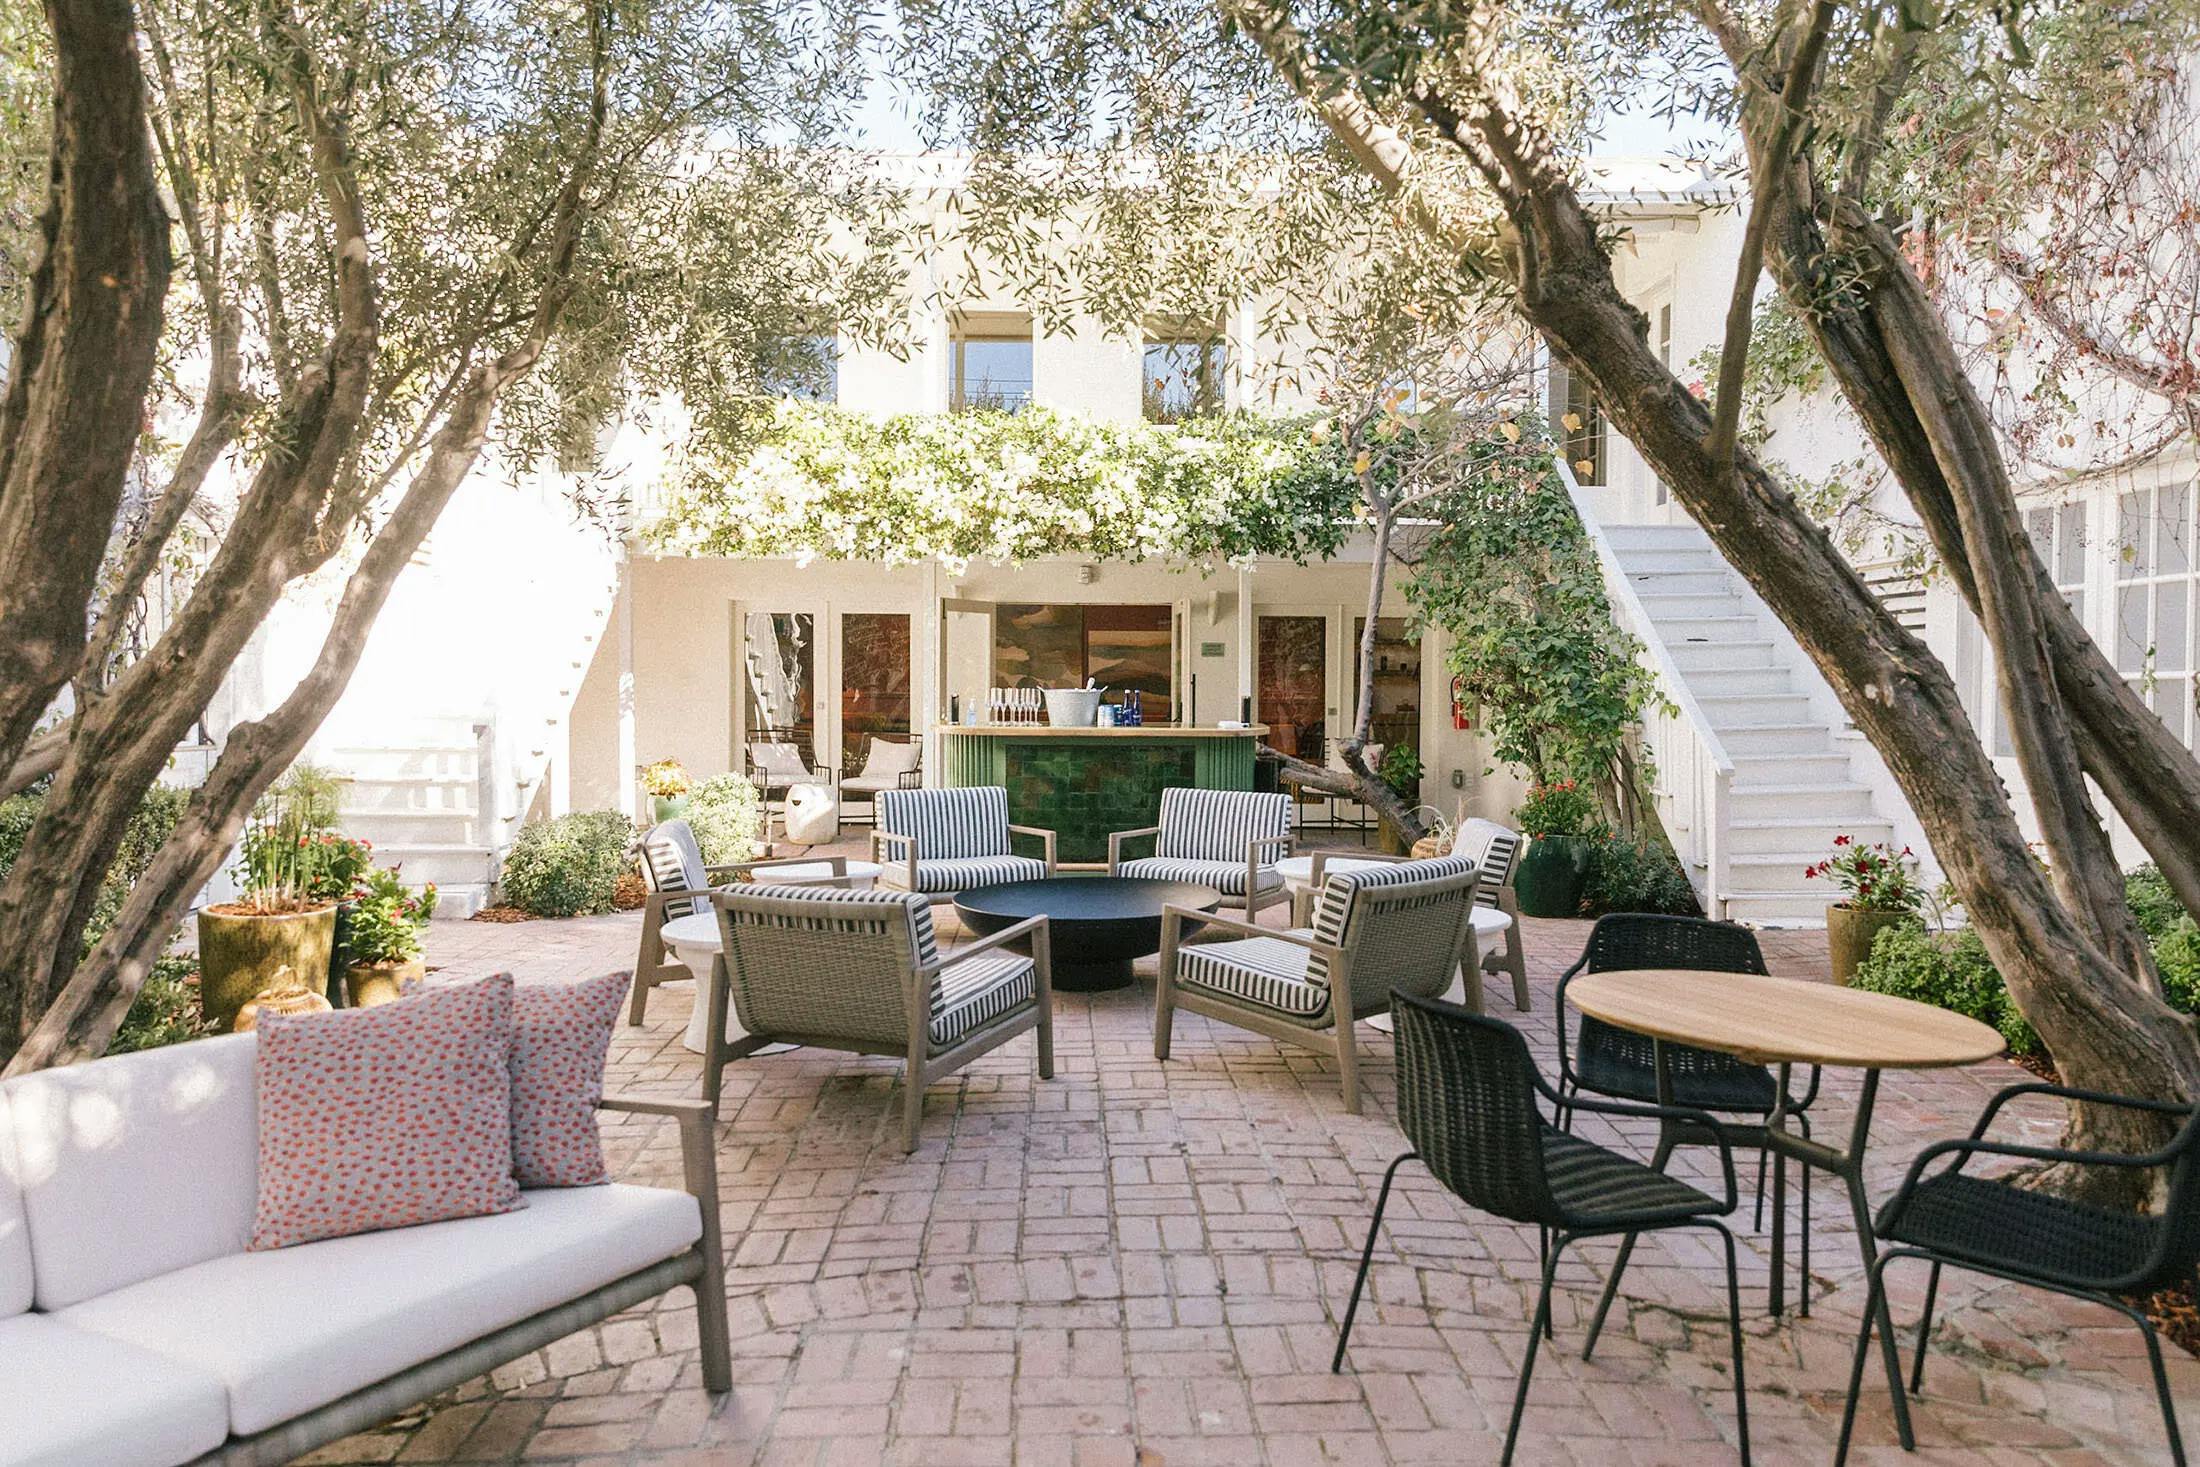 An outdoor patio with tables and chairs at the Chief Los Angeles Clubhouse.